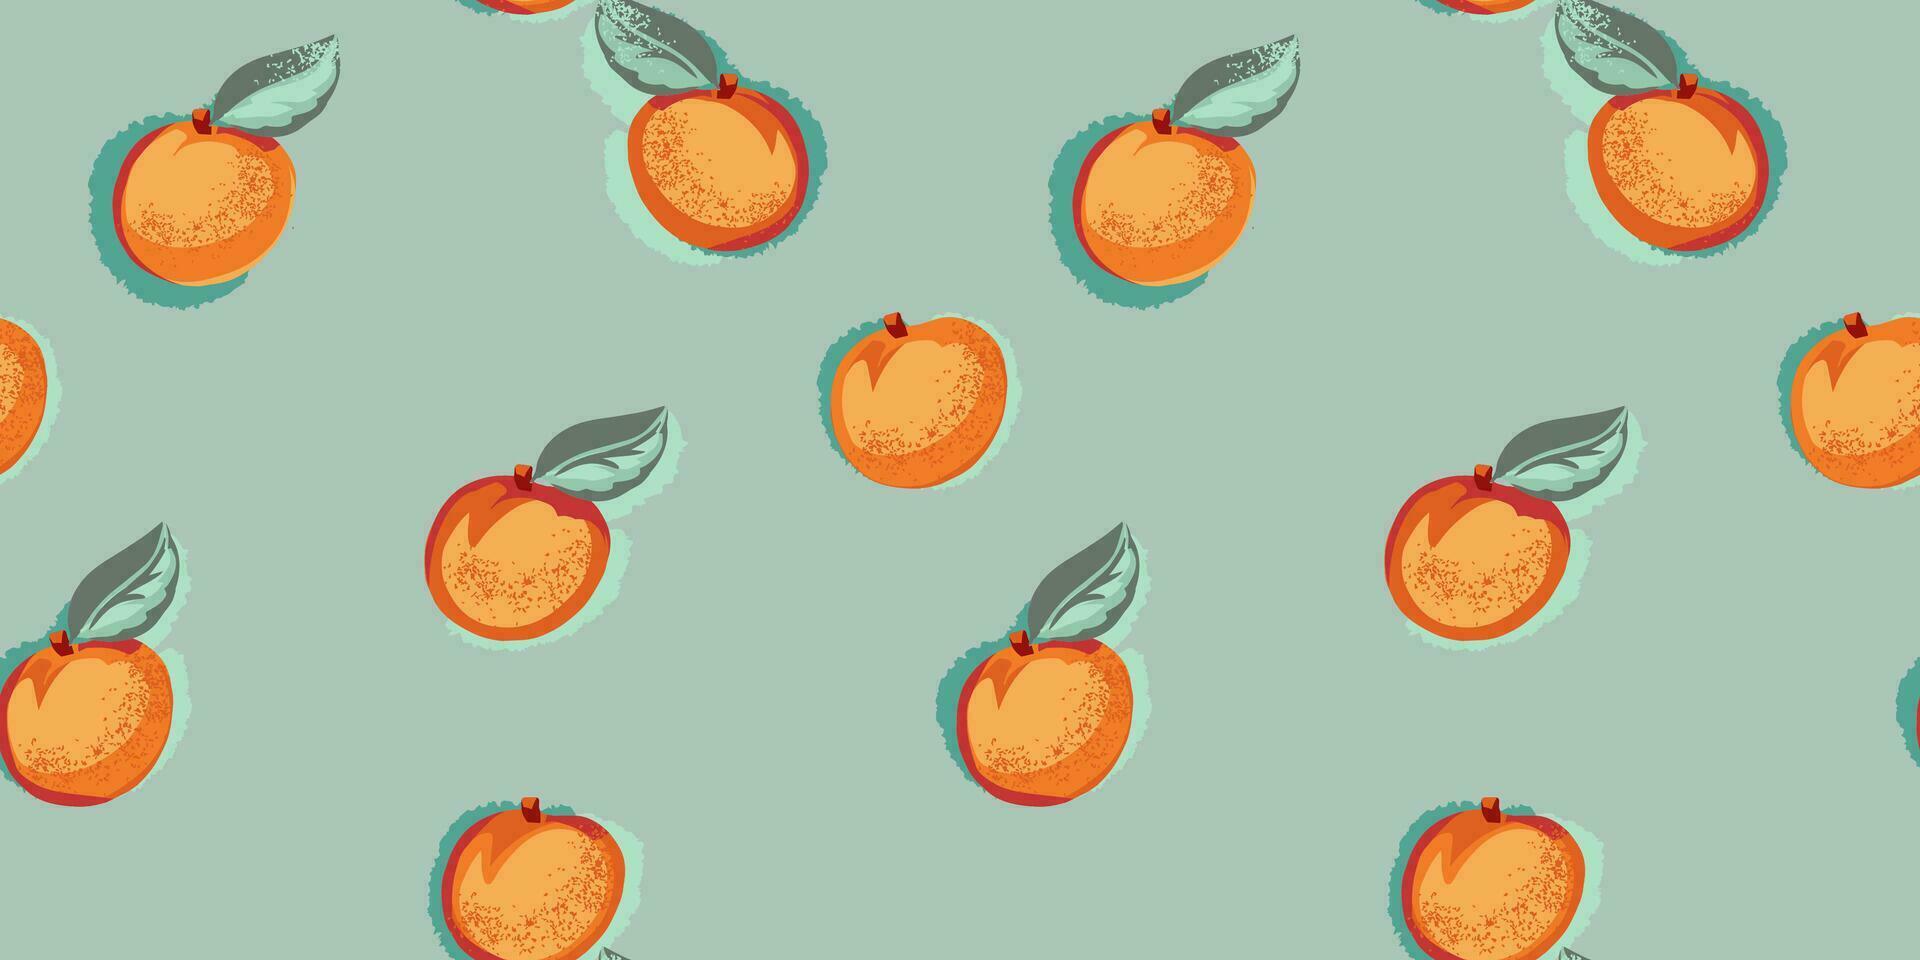 Apricot or peach artistic seamless pattern. Vector hand drawn fruits.  Summer  fruits  background.  Design ornament for paper, cover, fabric, interior decor, textile, surface design